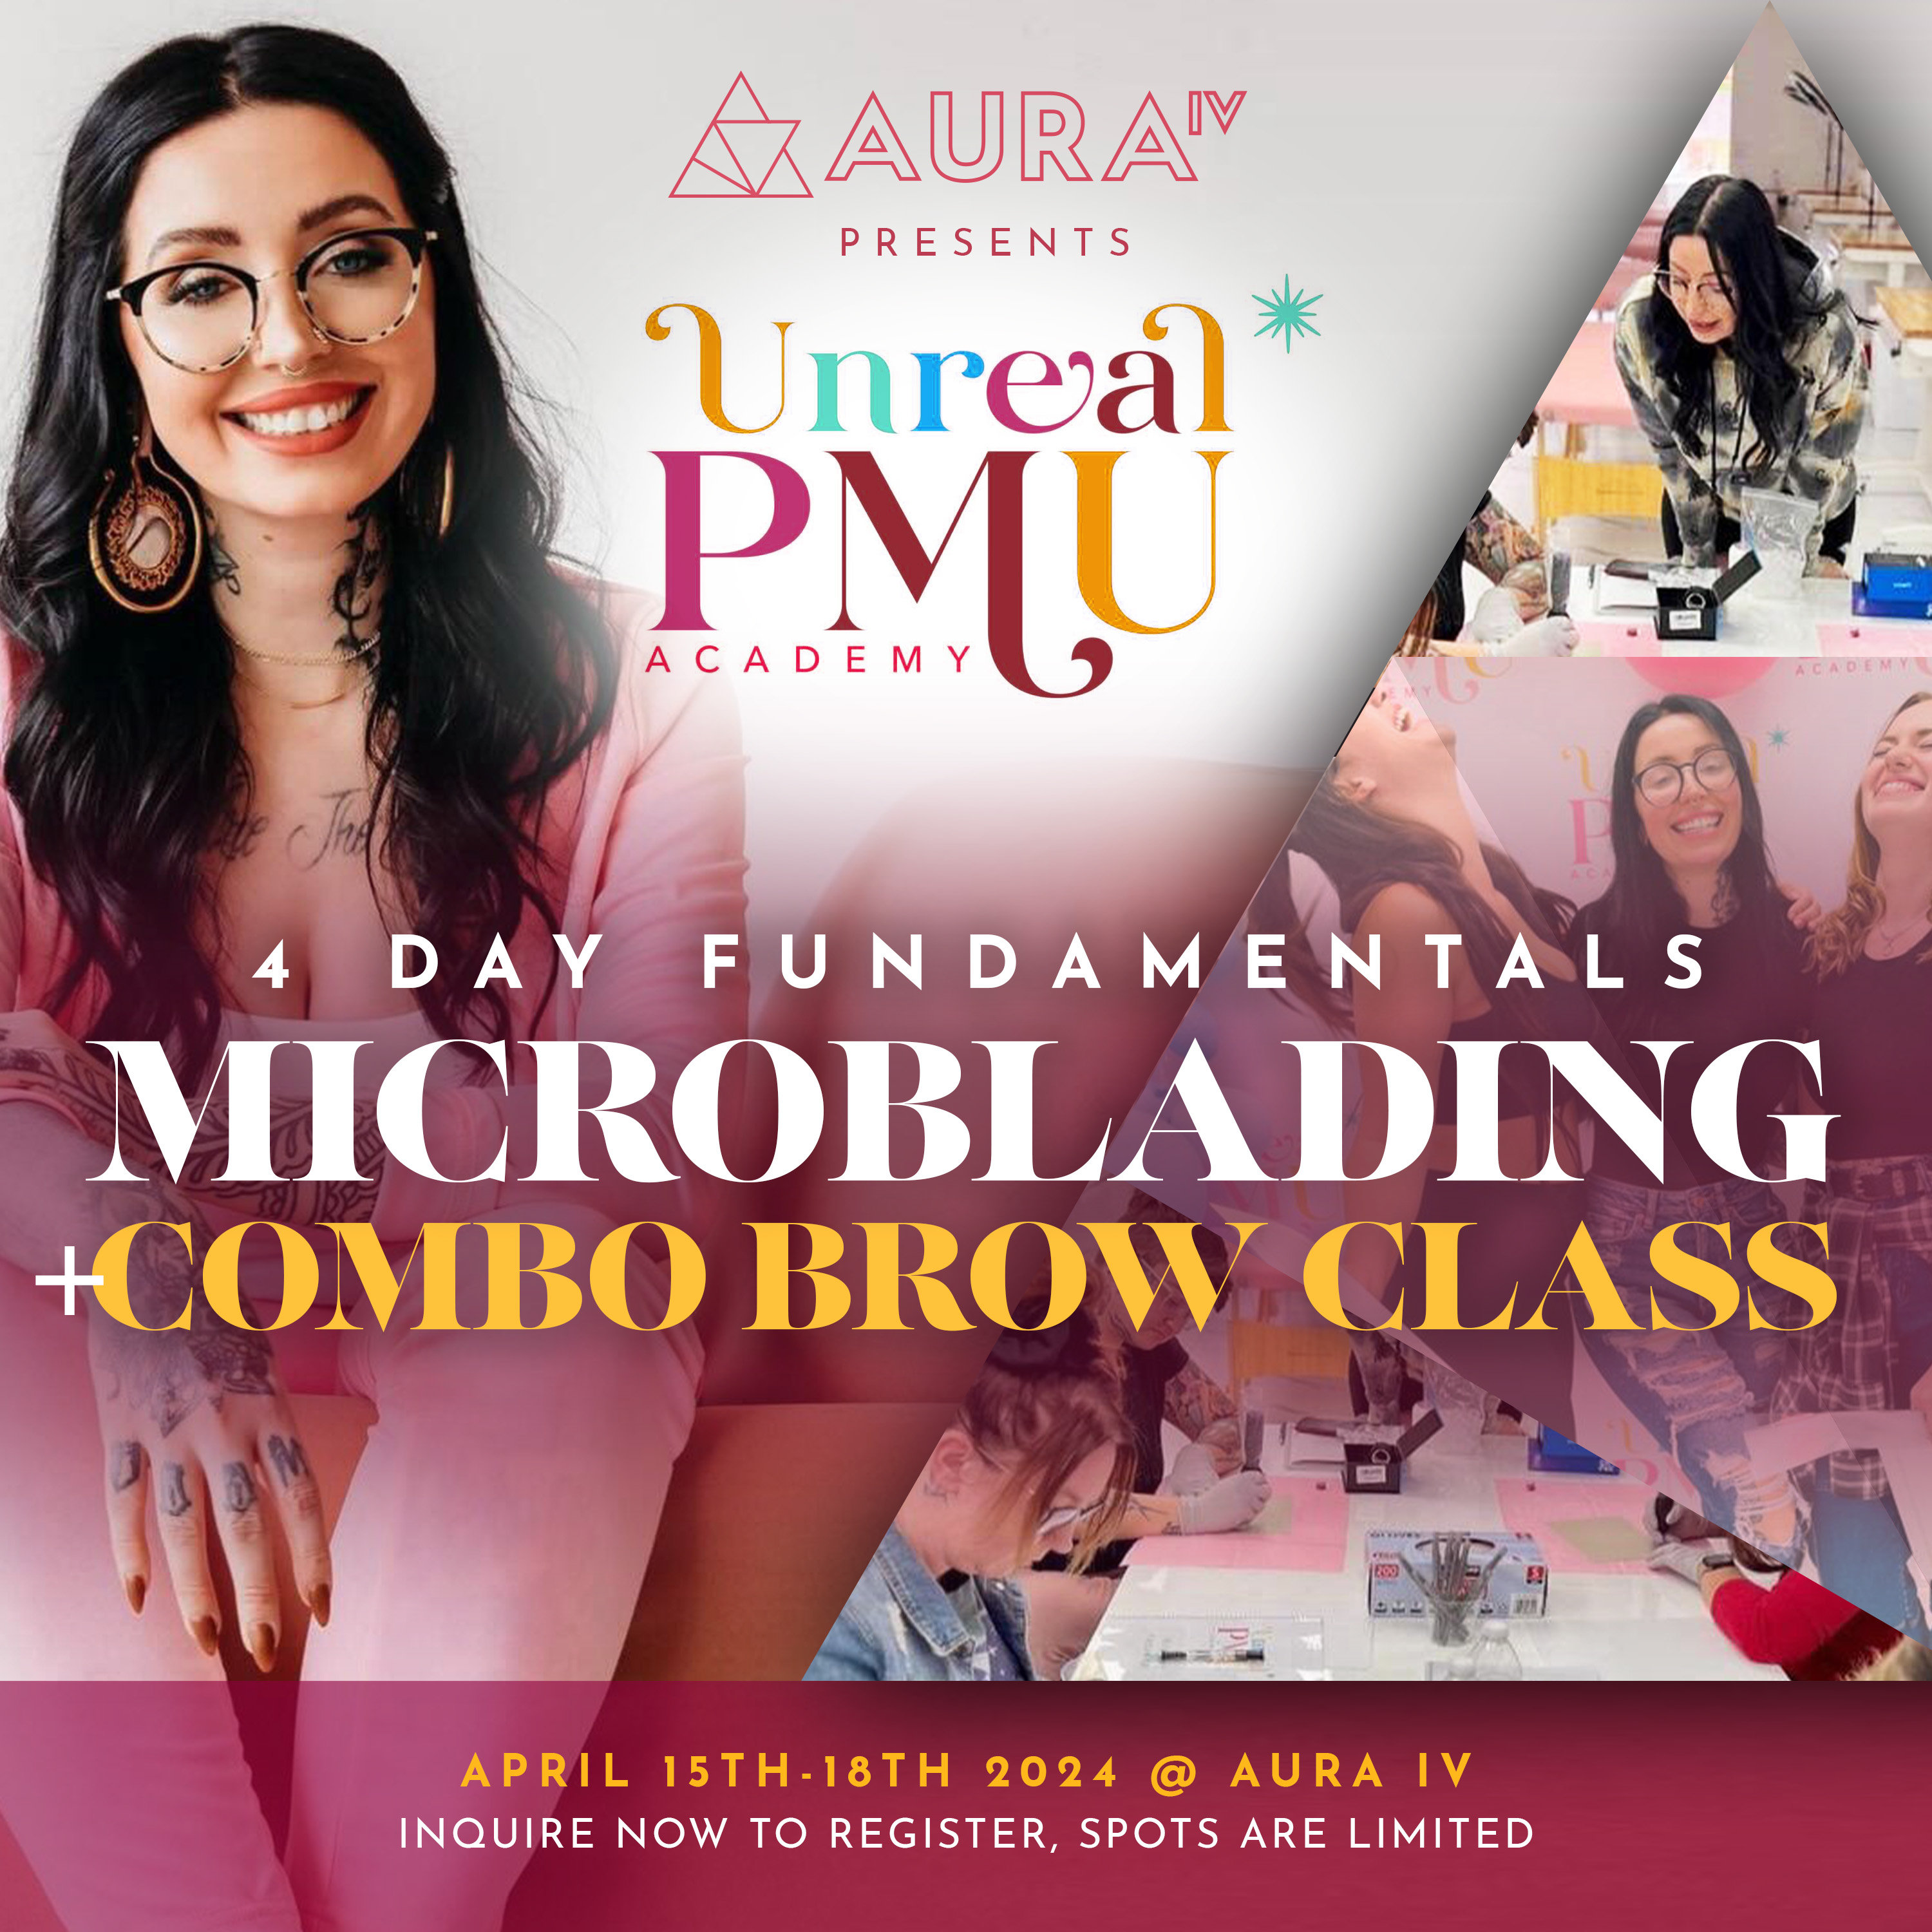 4 Day Fundamentals Microblading + Combo Brow Class